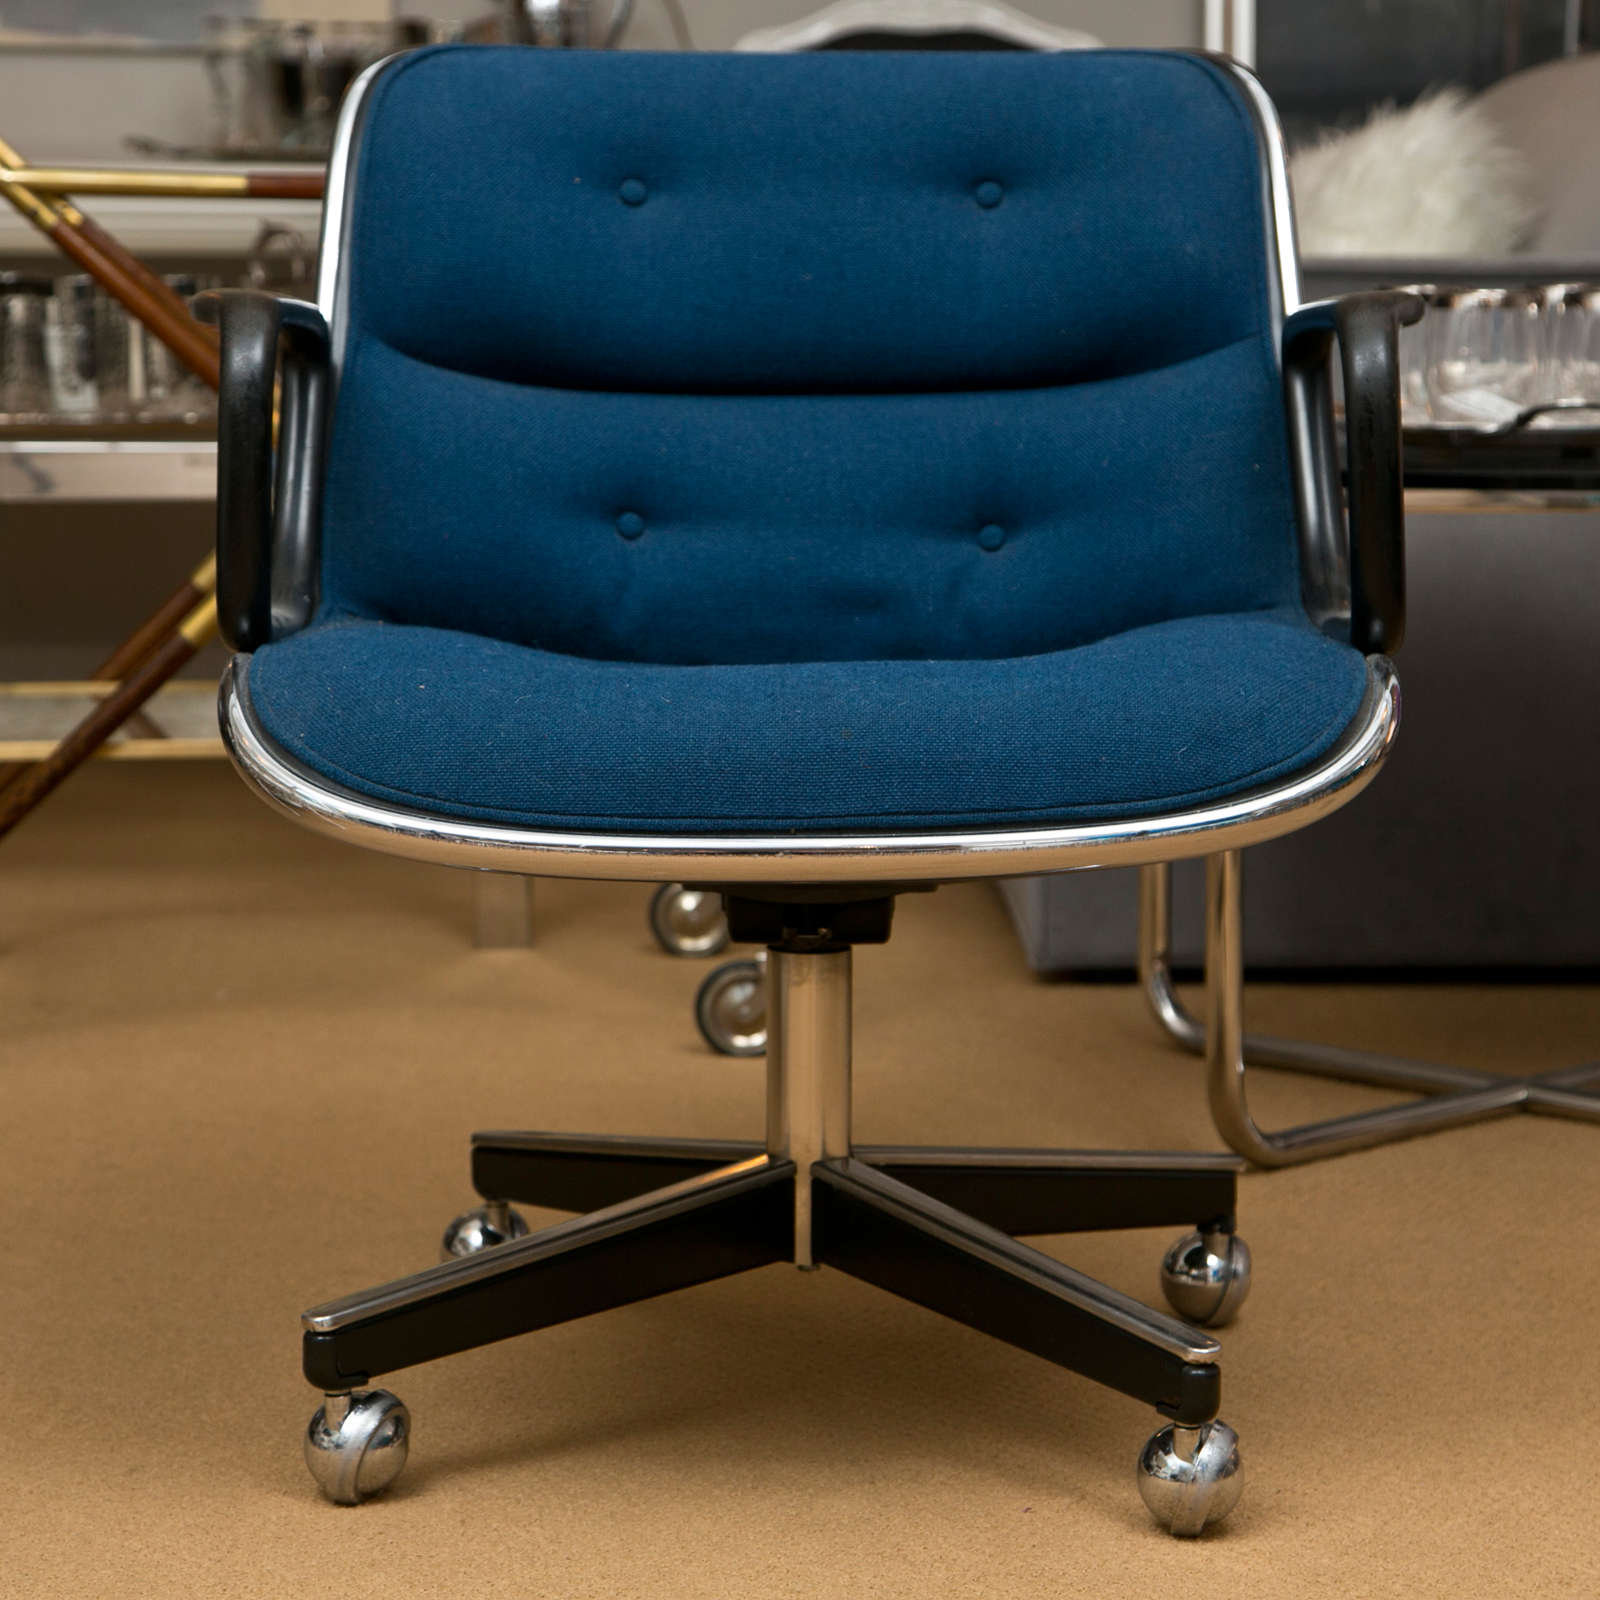 Executive office desk chair designed by Charles Pollack for Knoll. Upholstered in Knoll fabric. Swivels on a spider base with original castors. Originally purchased for IBM offices.
One also available in brown without castors, also adjustable.